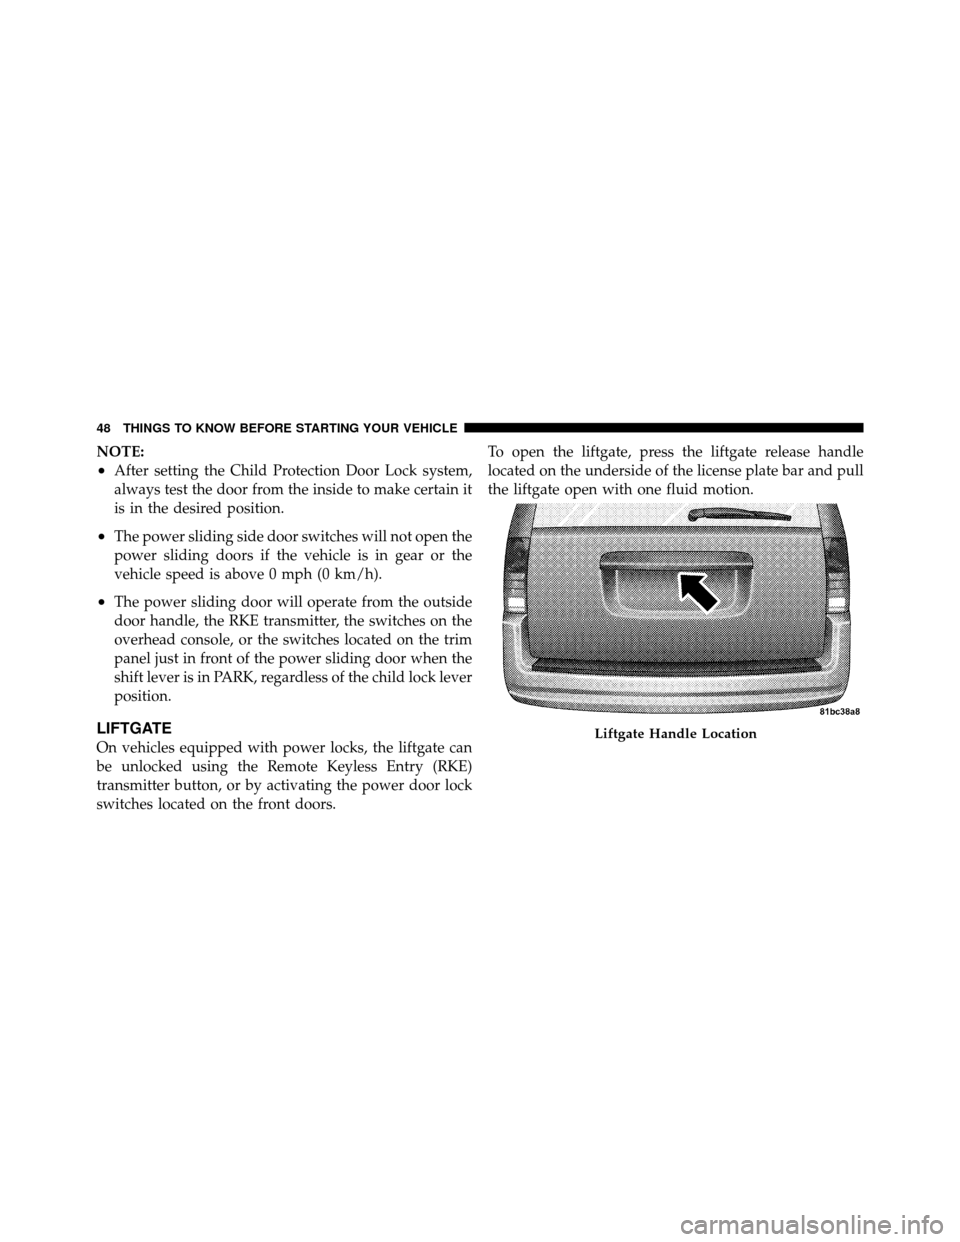 DODGE GRAND CARAVAN 2010 5.G Owners Manual 
NOTE:
•After setting the Child Protection Door Lock system,
always test the door from the inside to make certain it
is in the desired position.
•The power sliding side door switches will not open